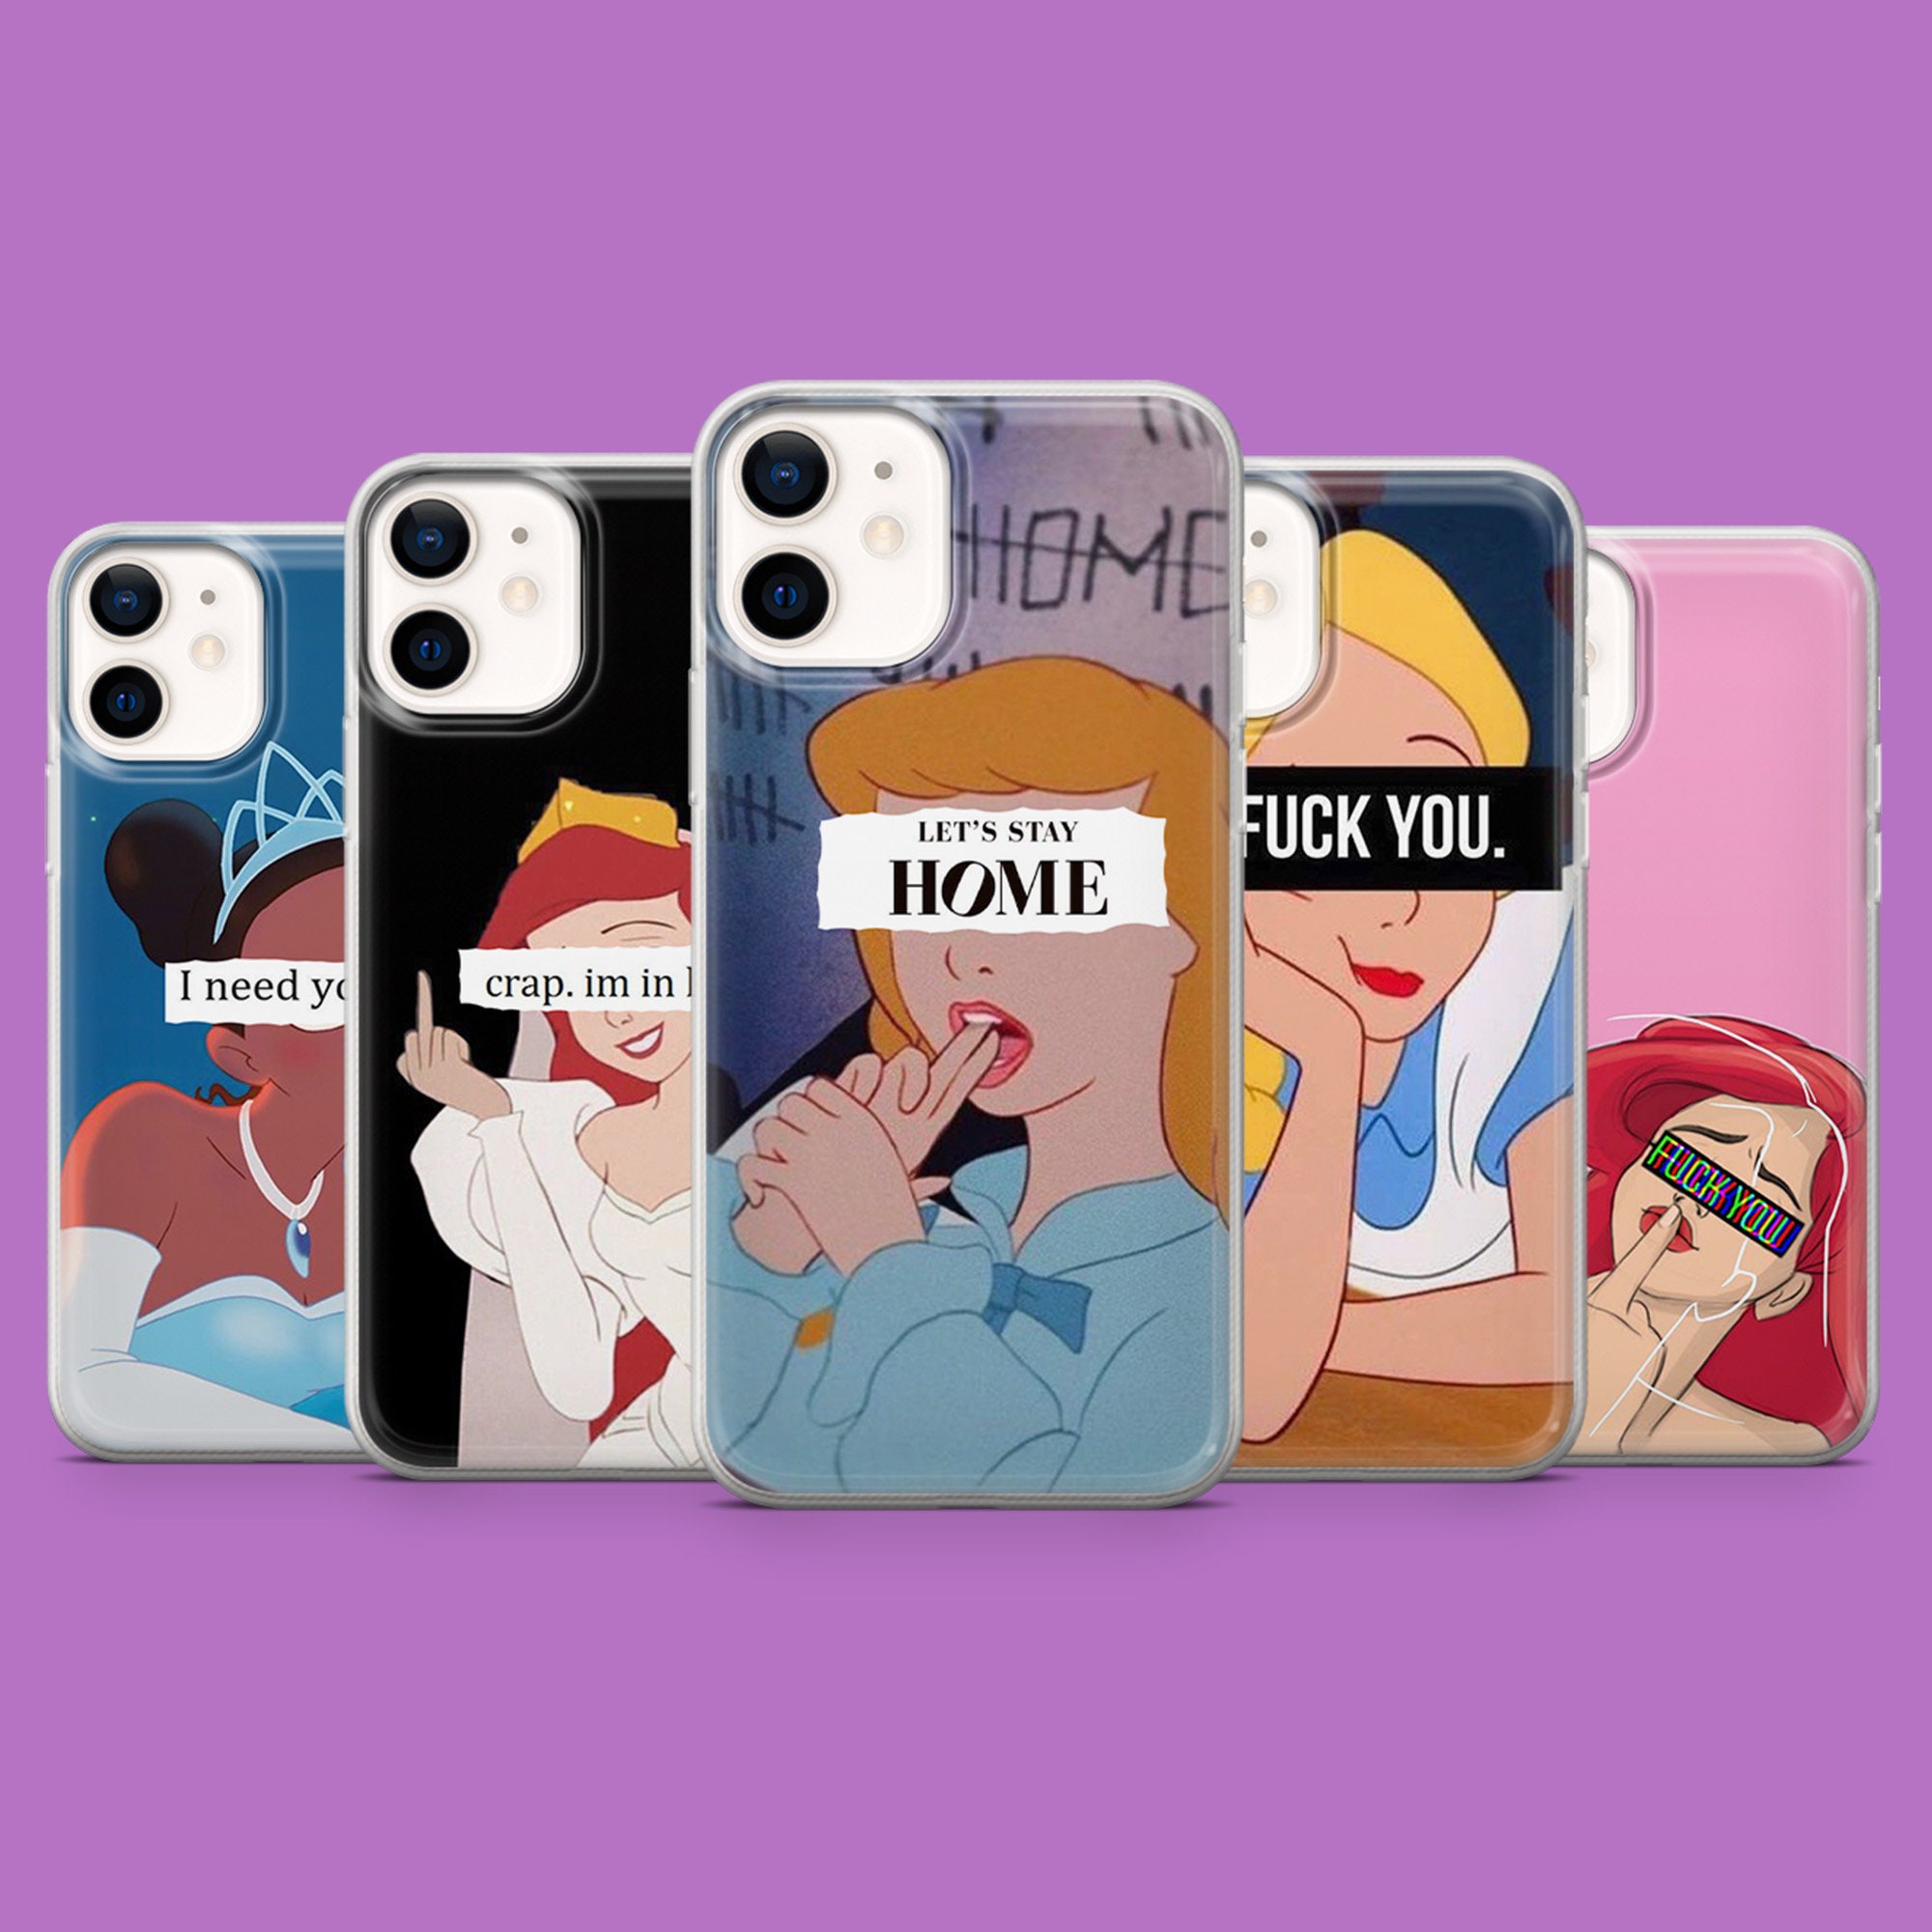 Scandal in the world of phone cases and covers - Softonic